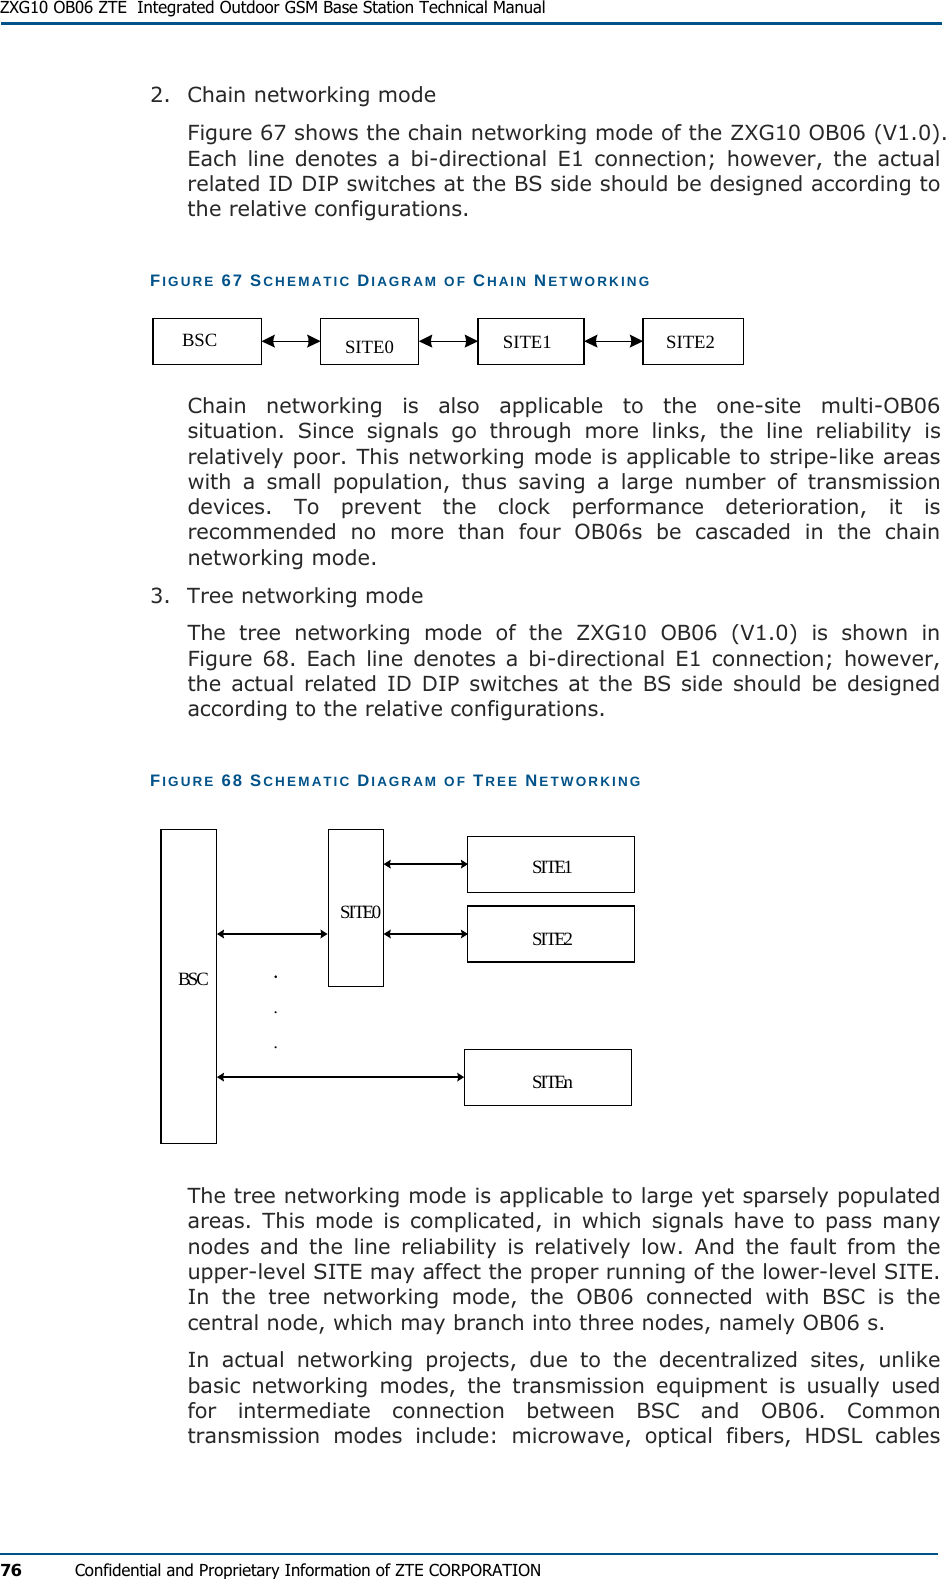  ZXG10 OB06 ZTE  Integrated Outdoor GSM Base Station Technical Manual 76  Confidential and Proprietary Information of ZTE CORPORATION 2.  Chain networking mode Figure 67 shows the chain networking mode of the ZXG10 OB06 (V1.0). Each line denotes a bi-directional E1 connection; however, the actual related ID DIP switches at the BS side should be designed according to the relative configurations. FIGURE 67 SCHEMATIC DIAGRAM OF CHAIN NETWORKING SITE0BSC SITE1 SITE2 Chain networking is also applicable to the one-site multi-OB06 situation. Since signals go through more links, the line reliability is relatively poor. This networking mode is applicable to stripe-like areas with a small population, thus saving a large number of transmission devices. To prevent the clock performance deterioration, it is recommended no more than four OB06s be cascaded in the chain networking mode. 3.  Tree networking mode The tree networking mode of the ZXG10 OB06 (V1.0) is shown in Figure 68. Each line denotes a bi-directional E1 connection; however, the actual related ID DIP switches at the BS side should be designed according to the relative configurations. FIGURE 68 SCHEMATIC DIAGRAM OF TREE NETWORKING ...BSCSITE0SITE1SITE2SITEn The tree networking mode is applicable to large yet sparsely populated areas. This mode is complicated, in which signals have to pass many nodes and the line reliability is relatively low. And the fault from the upper-level SITE may affect the proper running of the lower-level SITE. In the tree networking mode, the OB06 connected with BSC is the central node, which may branch into three nodes, namely OB06 s. In actual networking projects, due to the decentralized sites, unlike basic networking modes, the transmission equipment is usually used for intermediate connection between BSC and OB06. Common transmission modes include: microwave, optical fibers, HDSL cables 